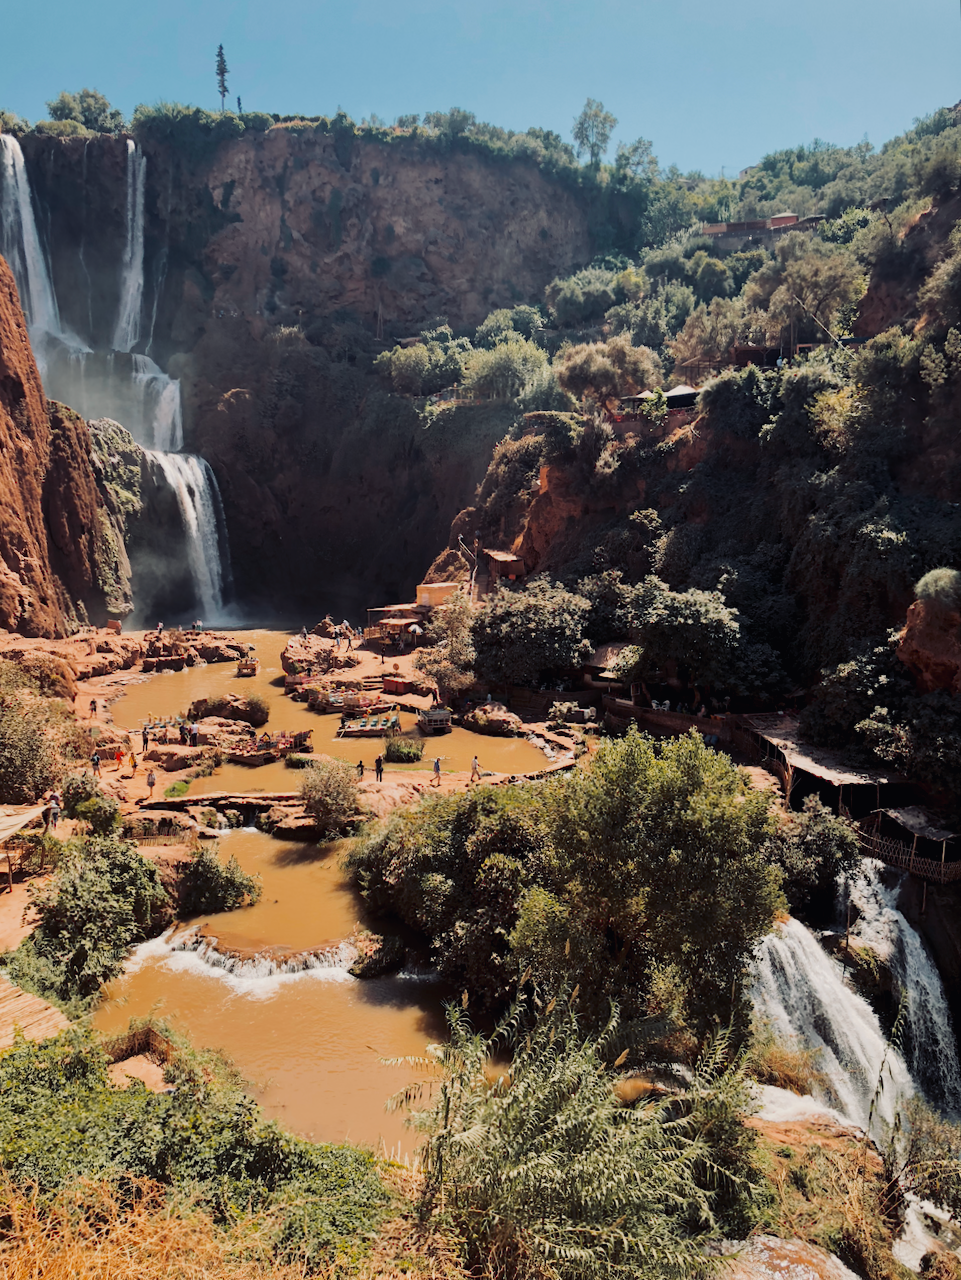 View of the cascades and pools at Ouzoud waterfall, North Africa Morocco